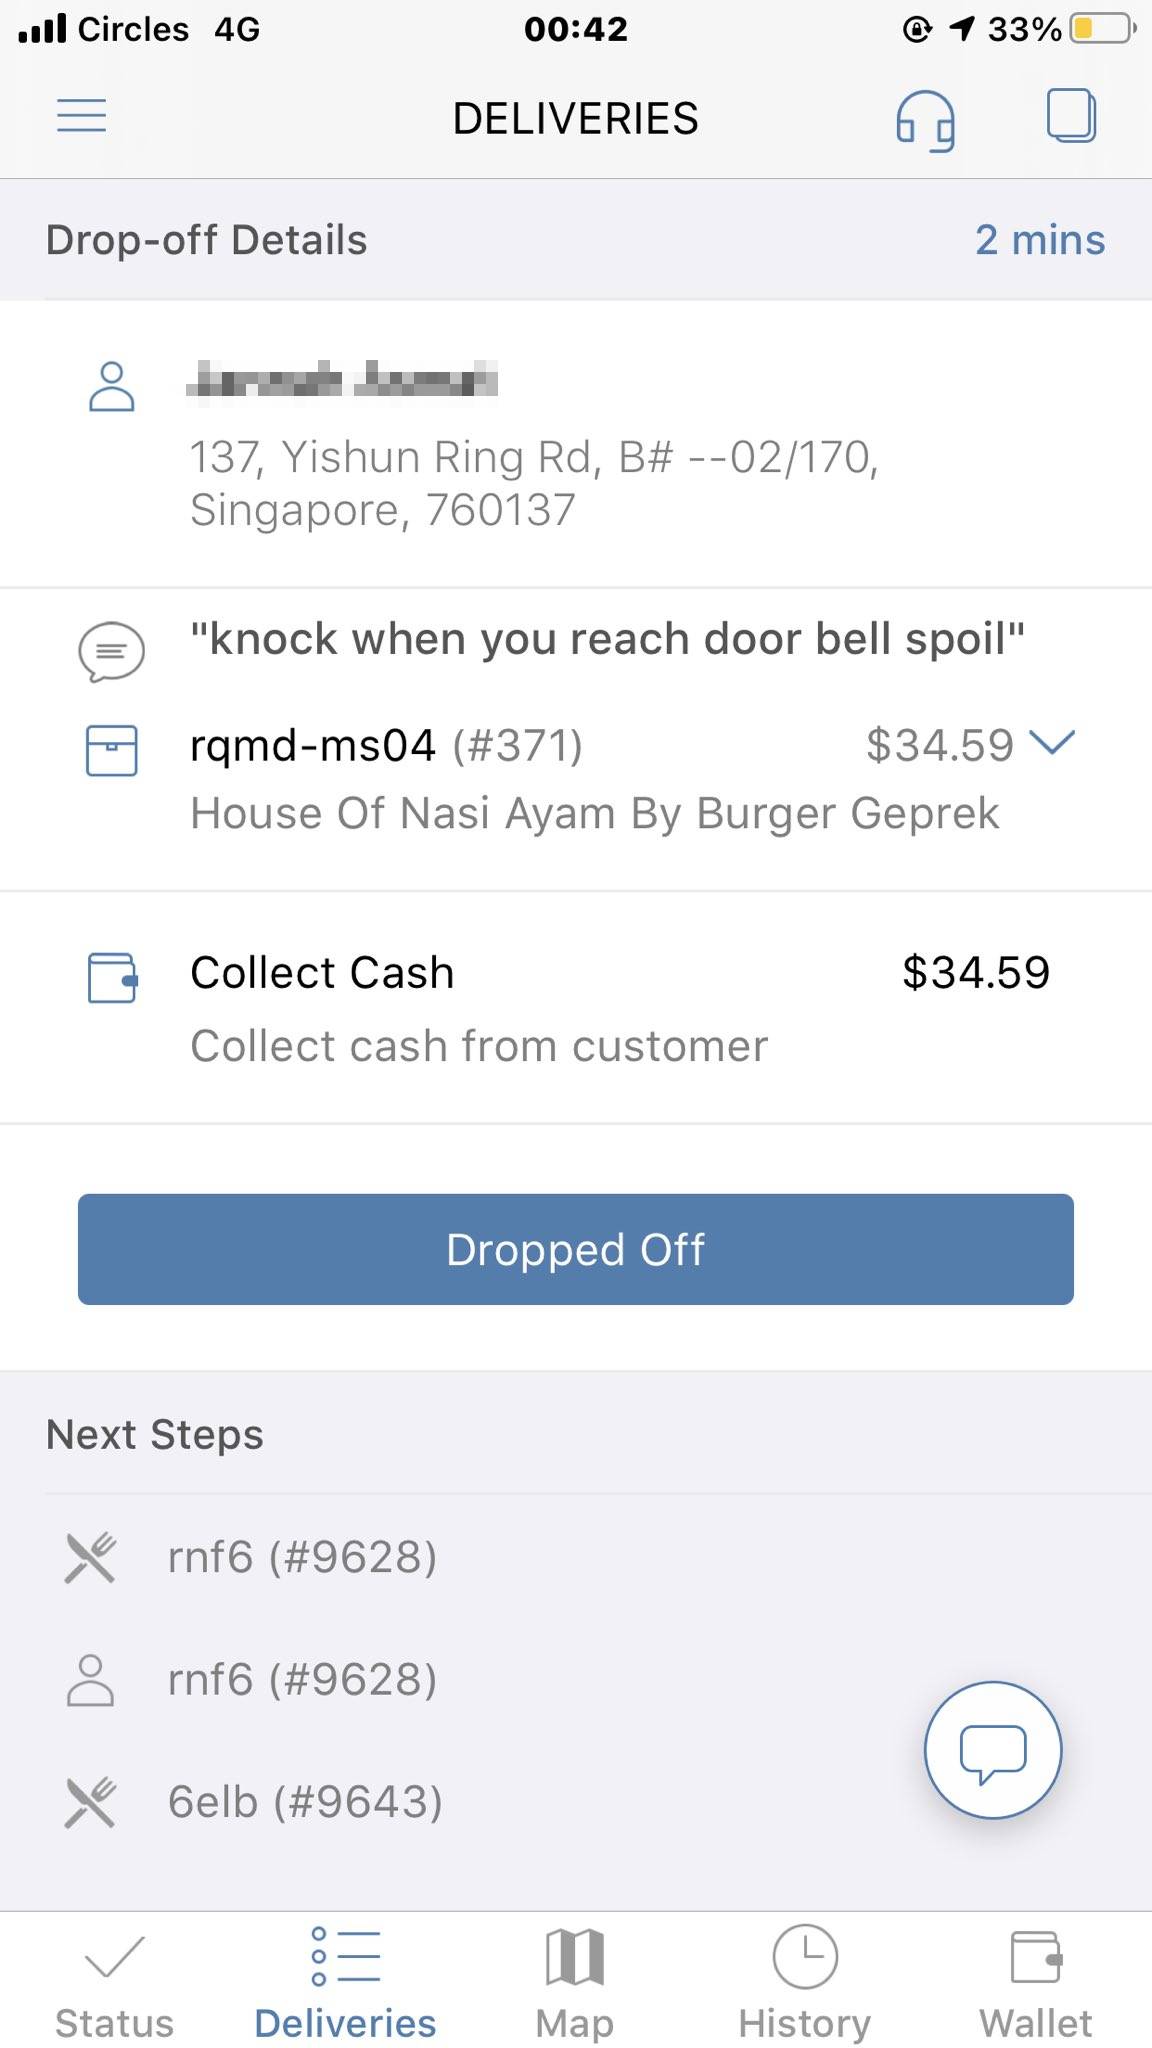 Yishun Home Allegedly A Victim Of Food Delivery Pranks, Rider Warns Others To Decline Orders